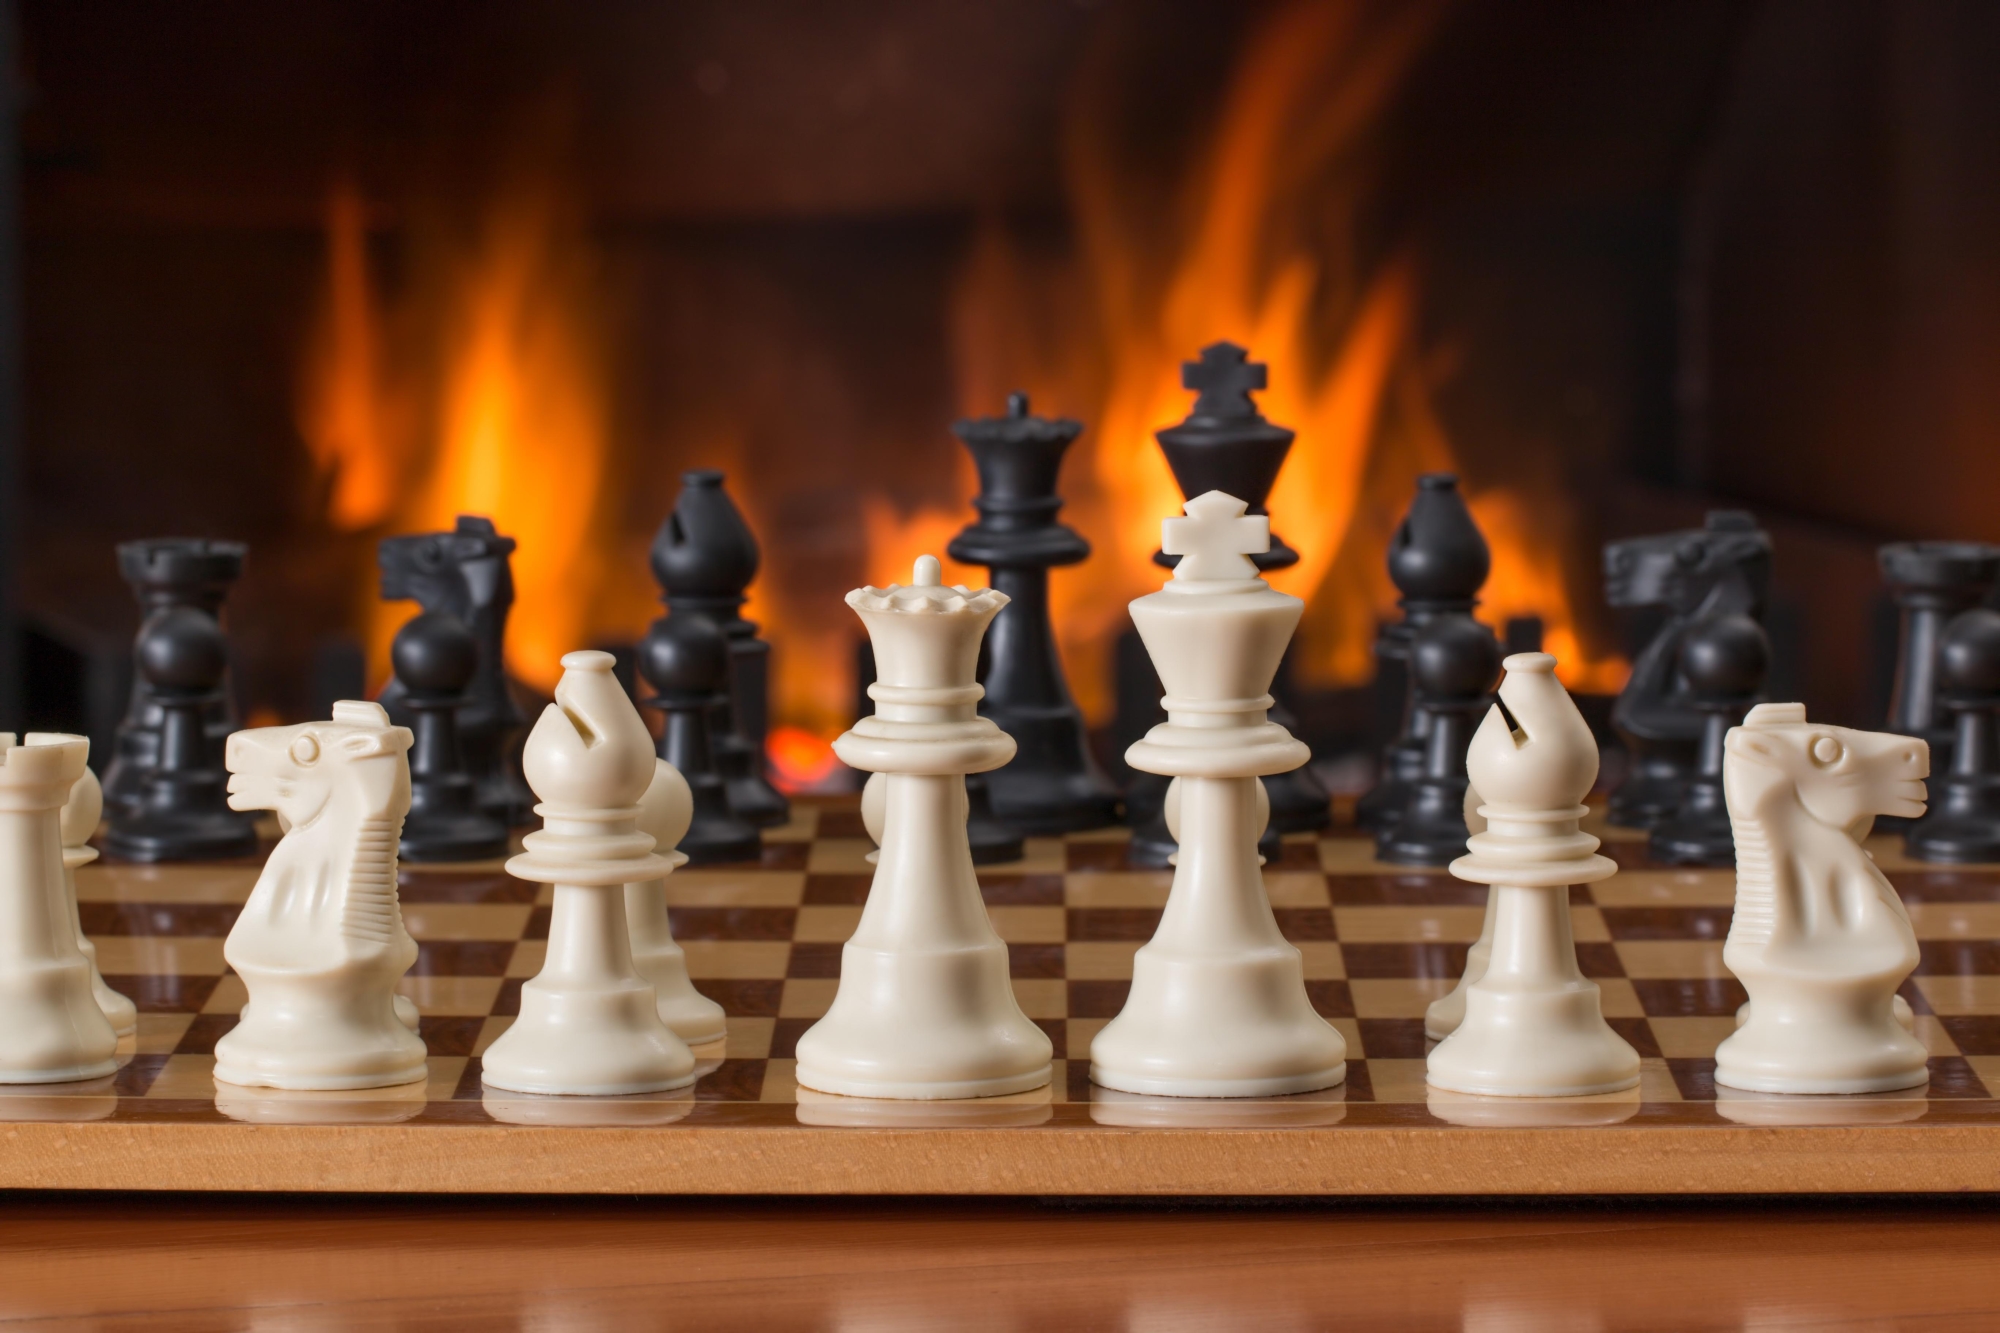 game of chess with fire in background